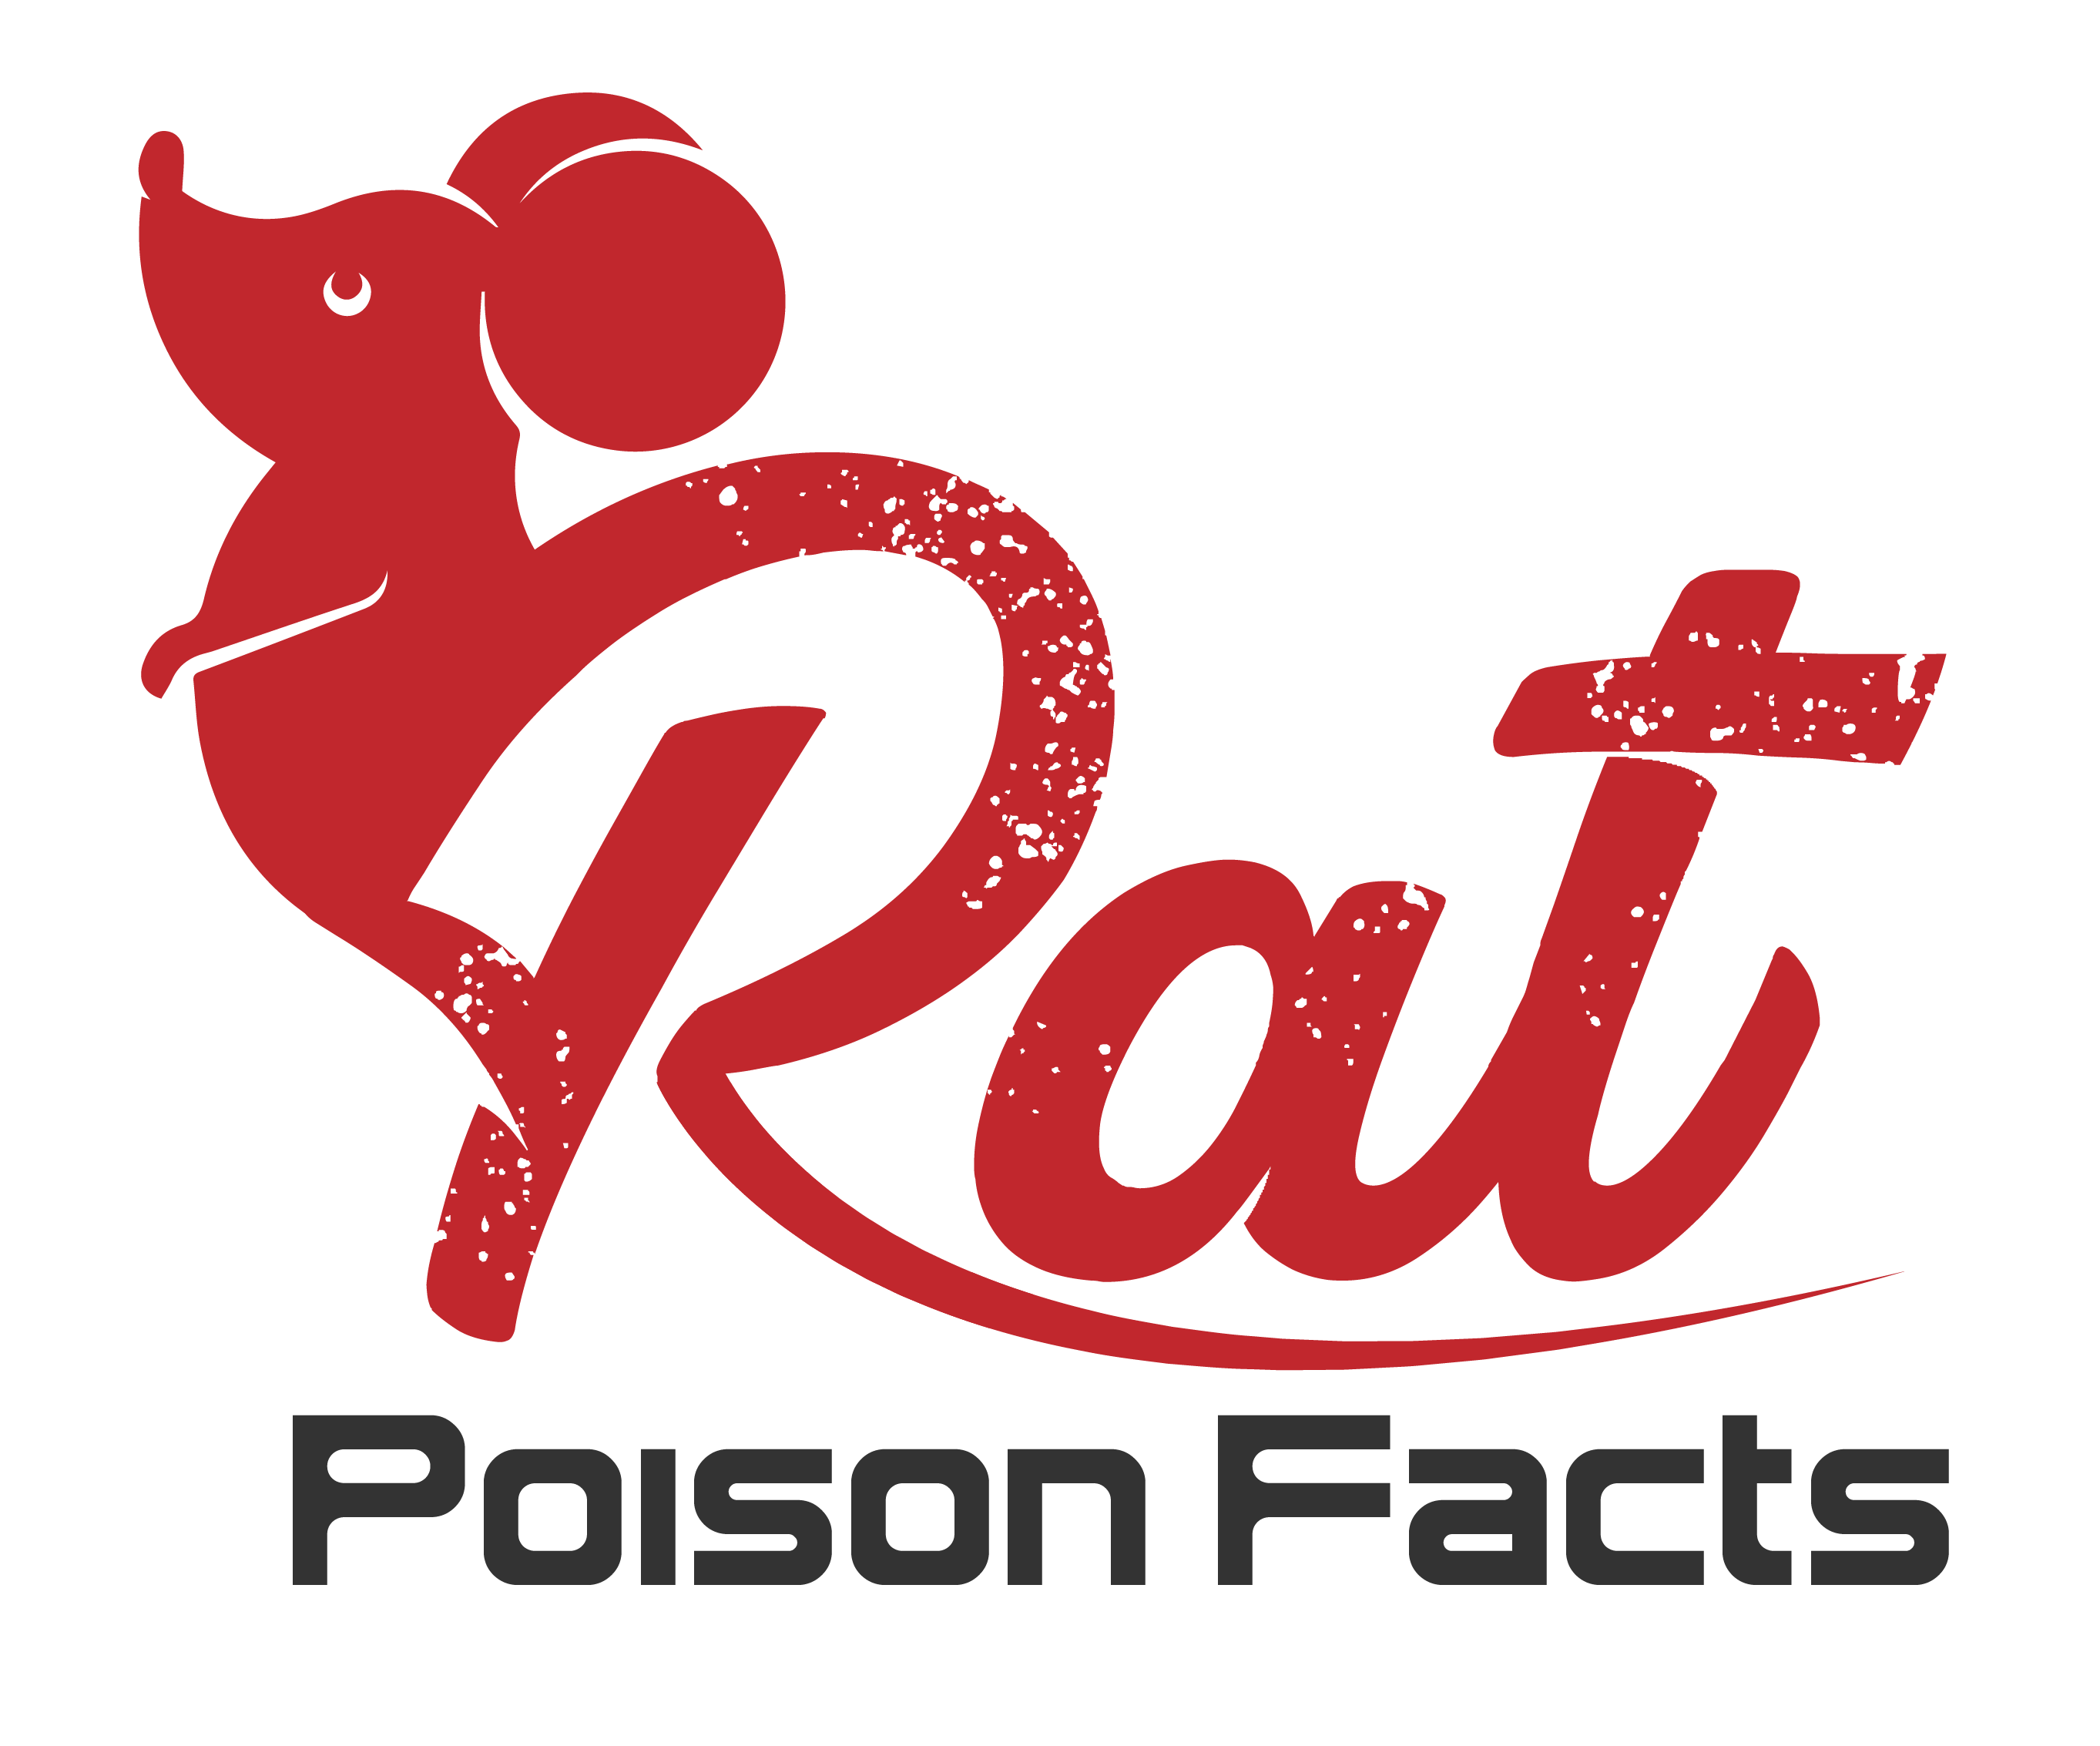 http://www.ratpoisonfacts.org/wp-content/uploads/2020/05/cropped-ratpoisonfacts.org-logo-red-1-1.png